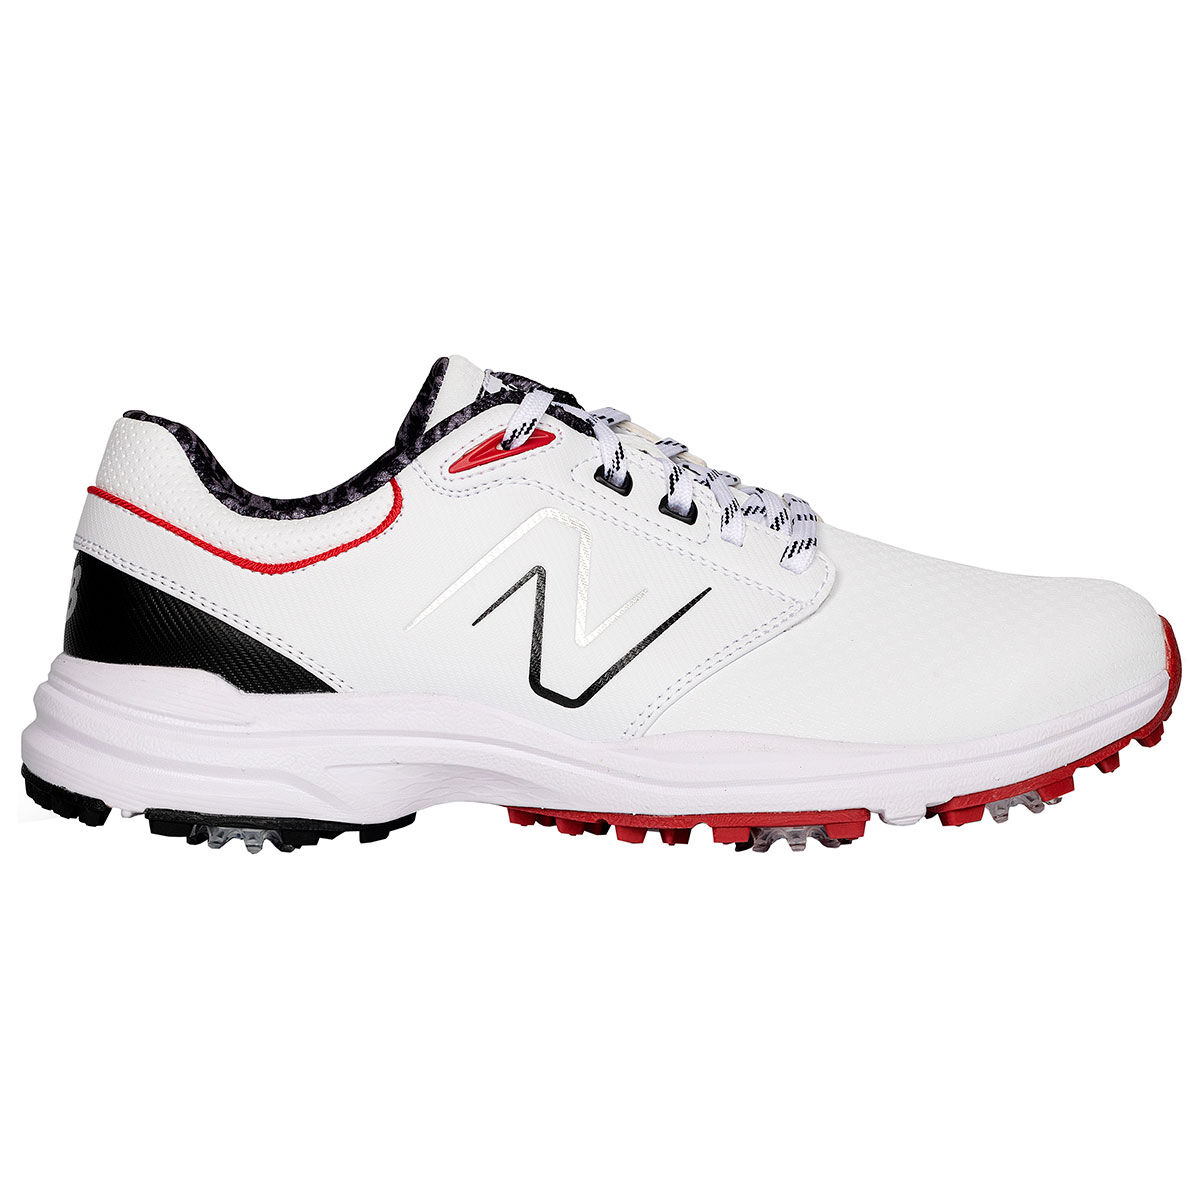 New Balance Men’s Brighton Waterproof Spiked Golf Shoes, Mens, White/red, 8 | American Golf